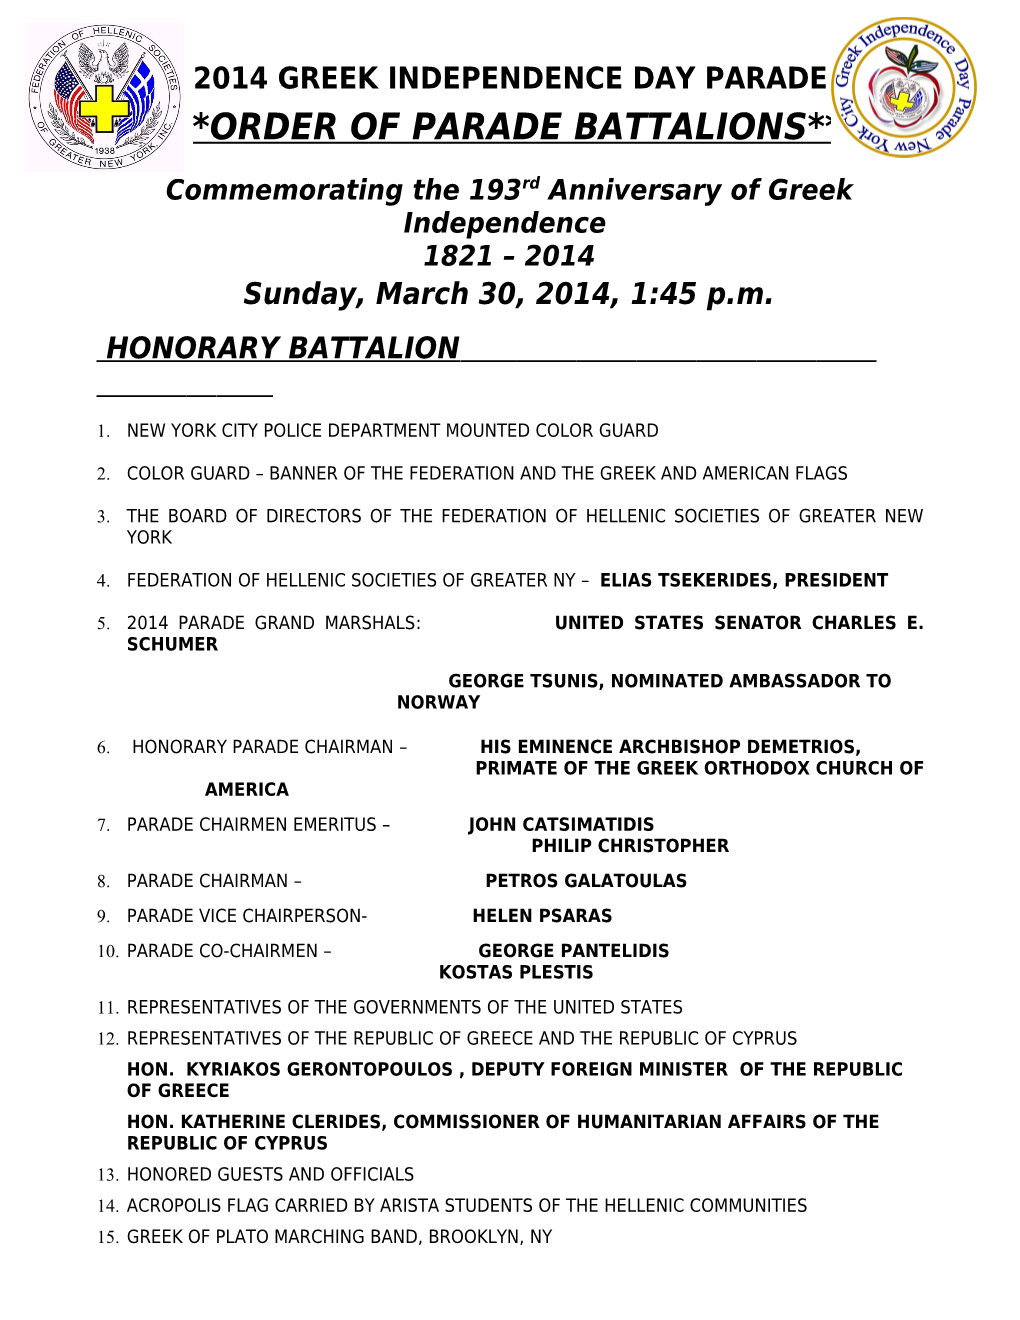 Commemorating the 193Rdanniversary of Greek Independence